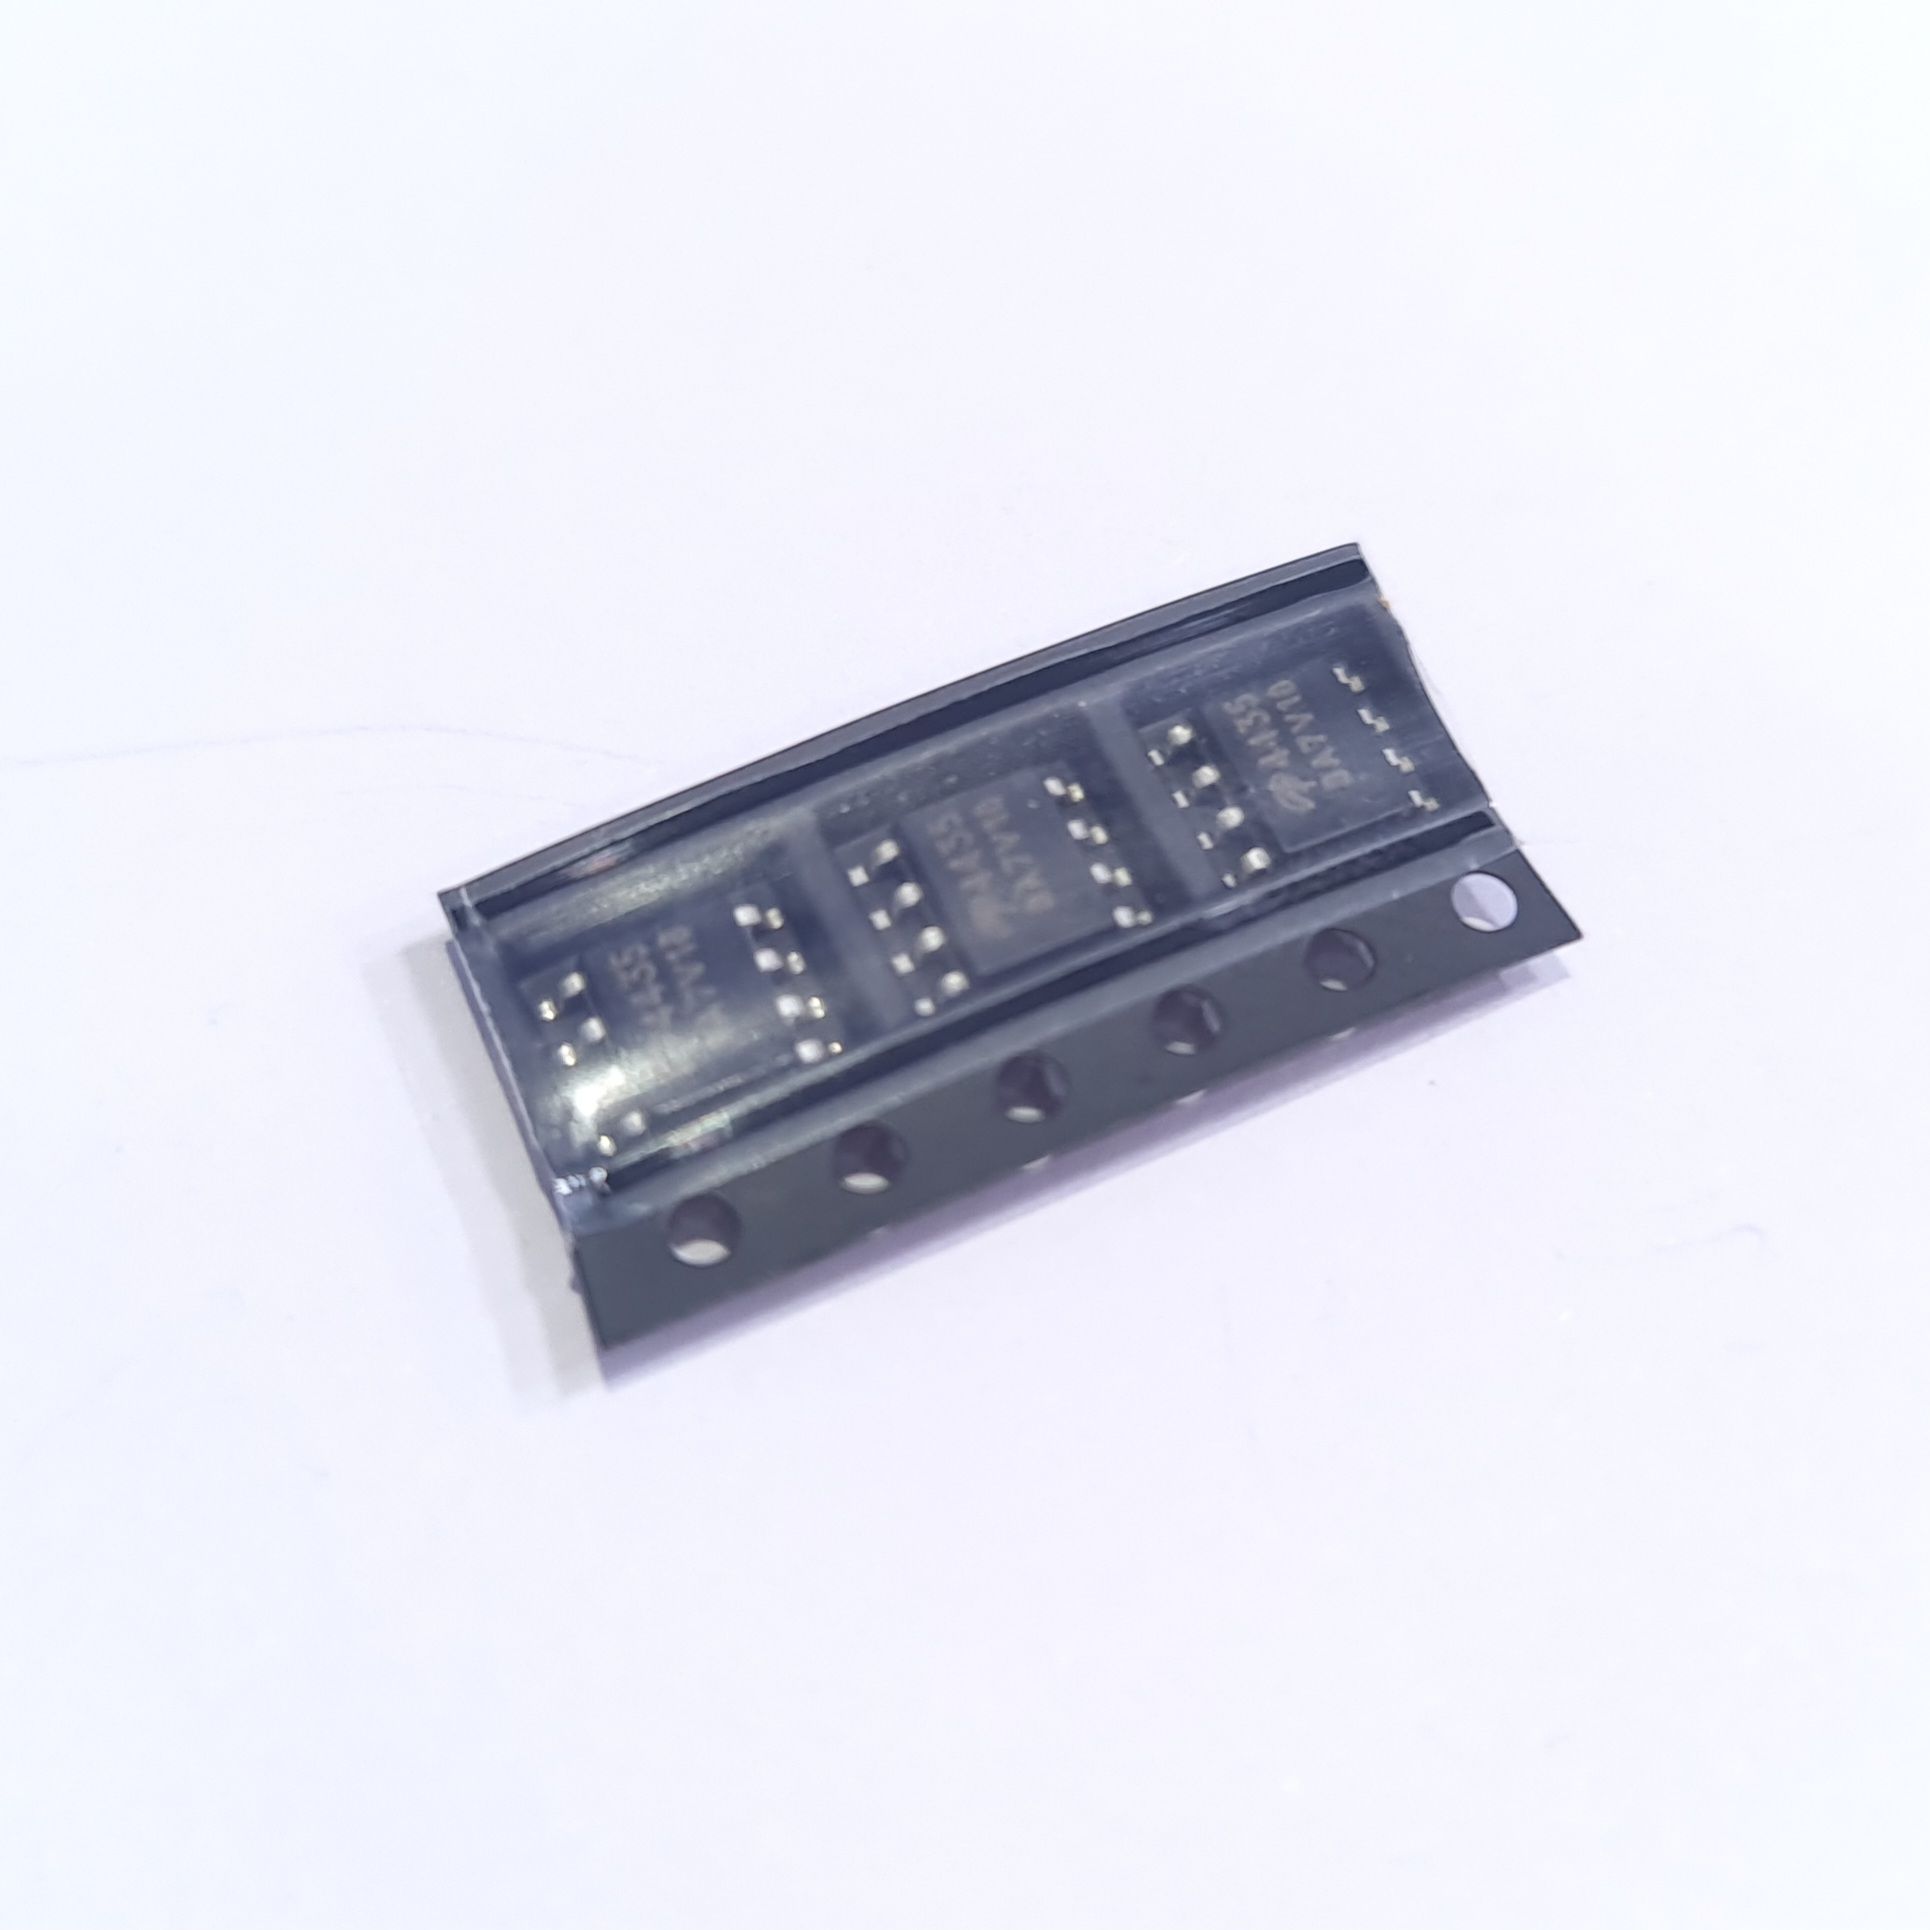 Транзистор, 3 шт, AO4435 (FDS4435) - 30V P-Channel MOSFET, SOP-8